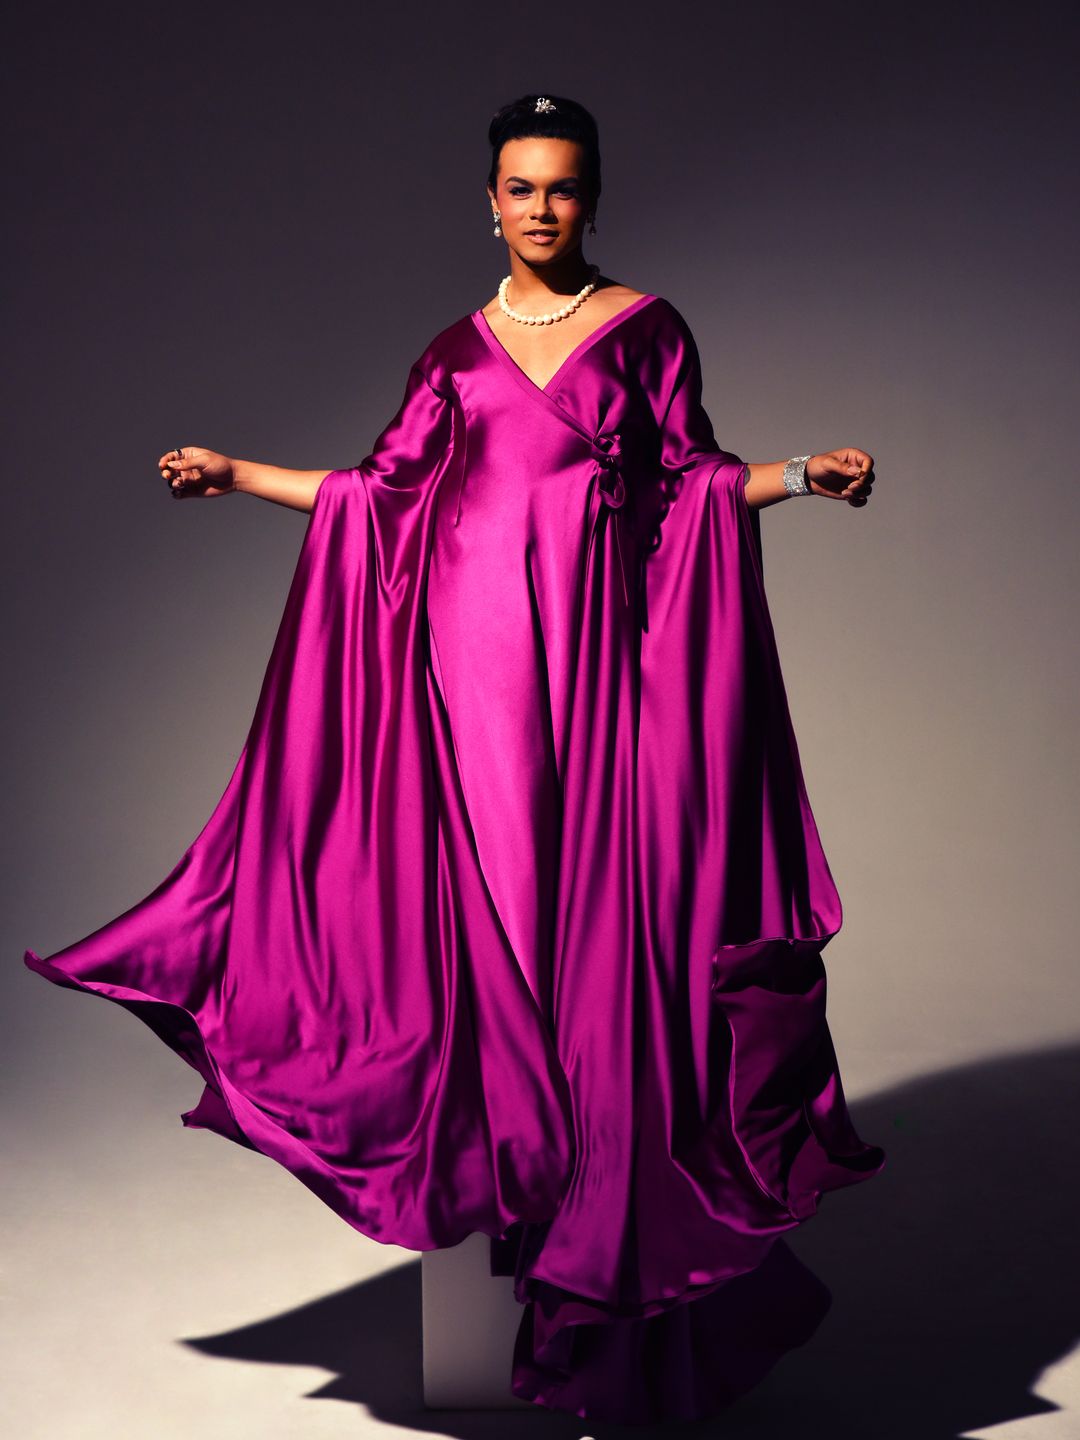 Damian Terriquez posing for a photo in a long silk pink gown